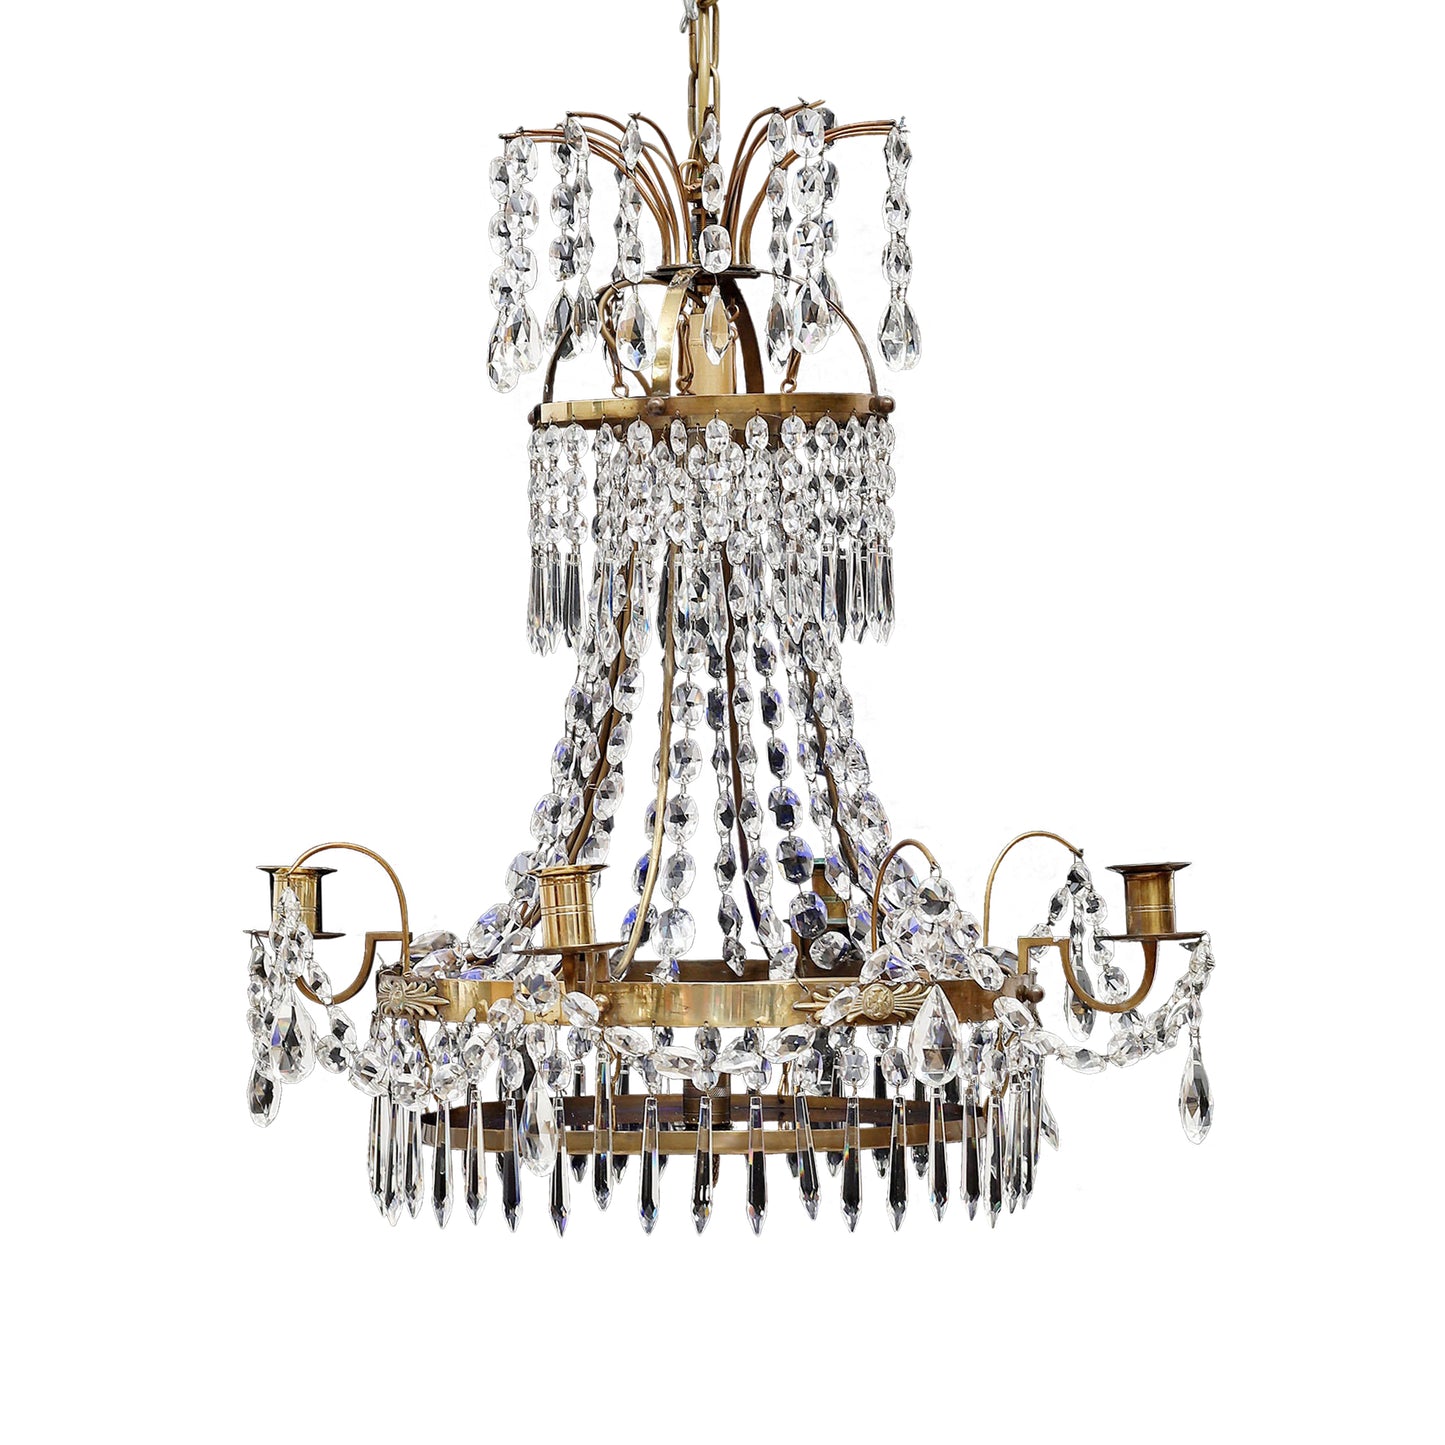 Gustavian Crystal Chandelier with Decorative Blue Bowl